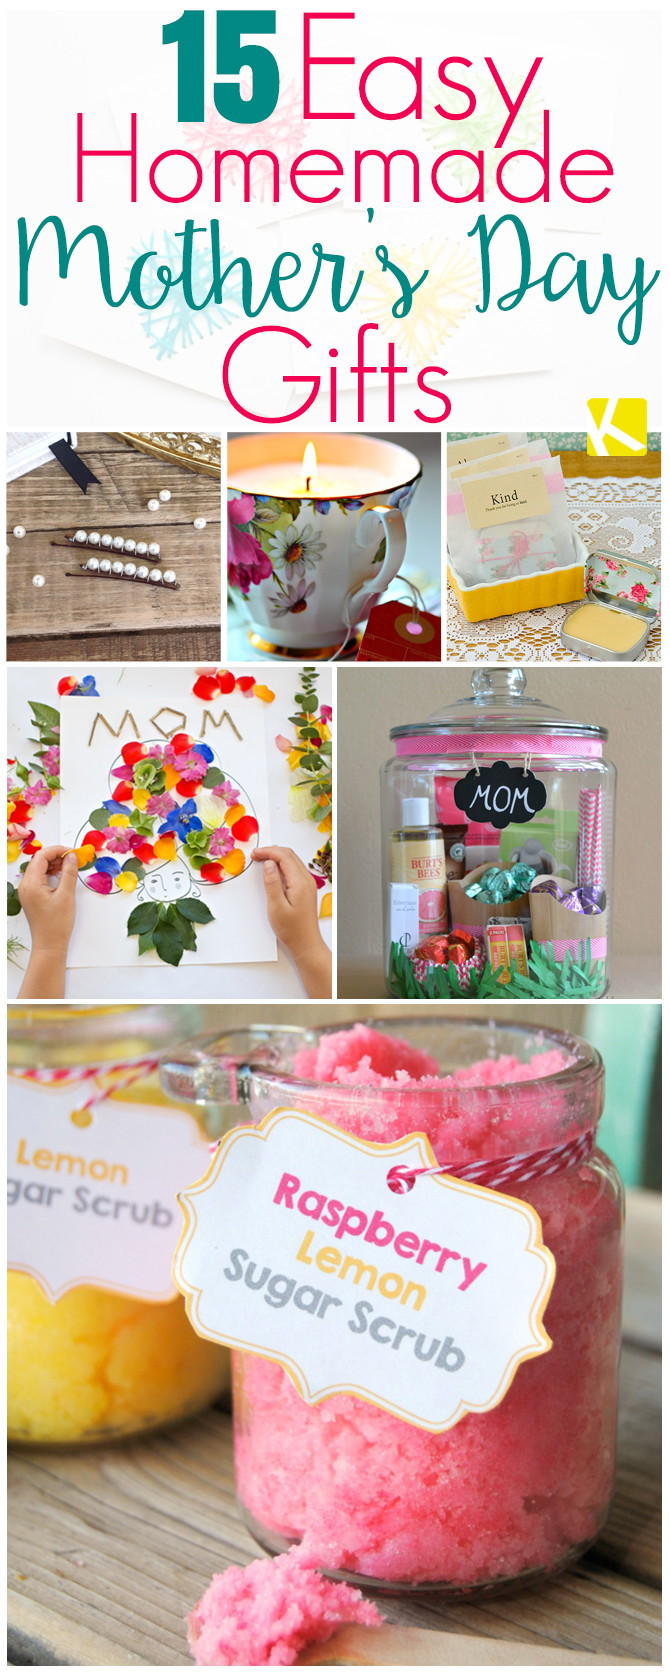 Easy DIY Father'S Day Gifts
 15 Mother’s Day Gifts That Are Ridiculously Easy to Make